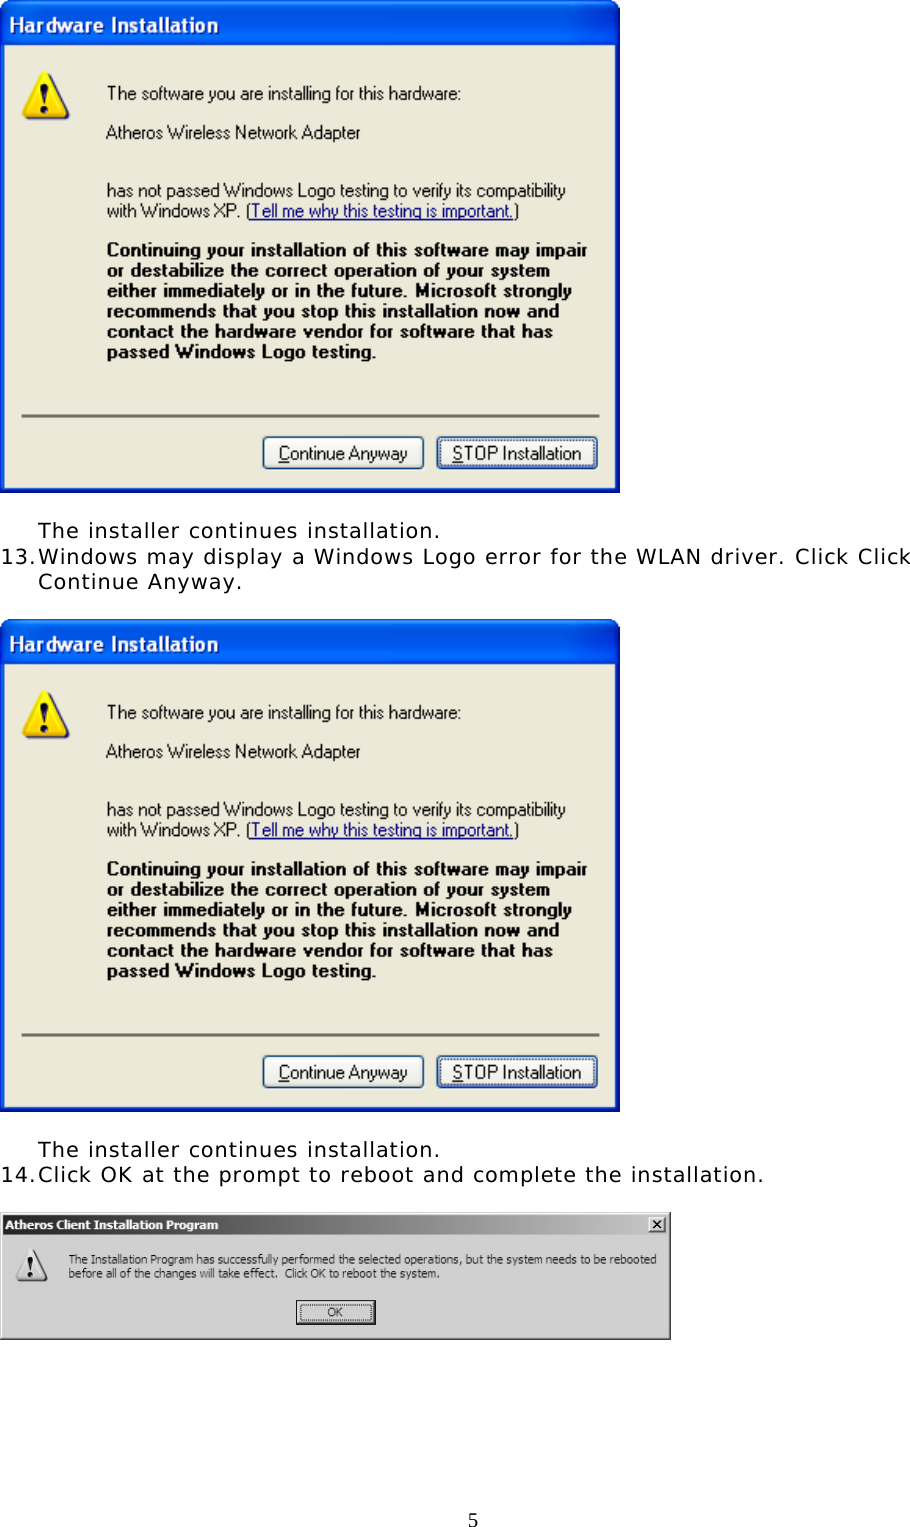  5   The installer continues installation. 13. Windows may display a Windows Logo error for the WLAN driver. Click Click Continue Anyway.     The installer continues installation. 14. Click OK at the prompt to reboot and complete the installation.          